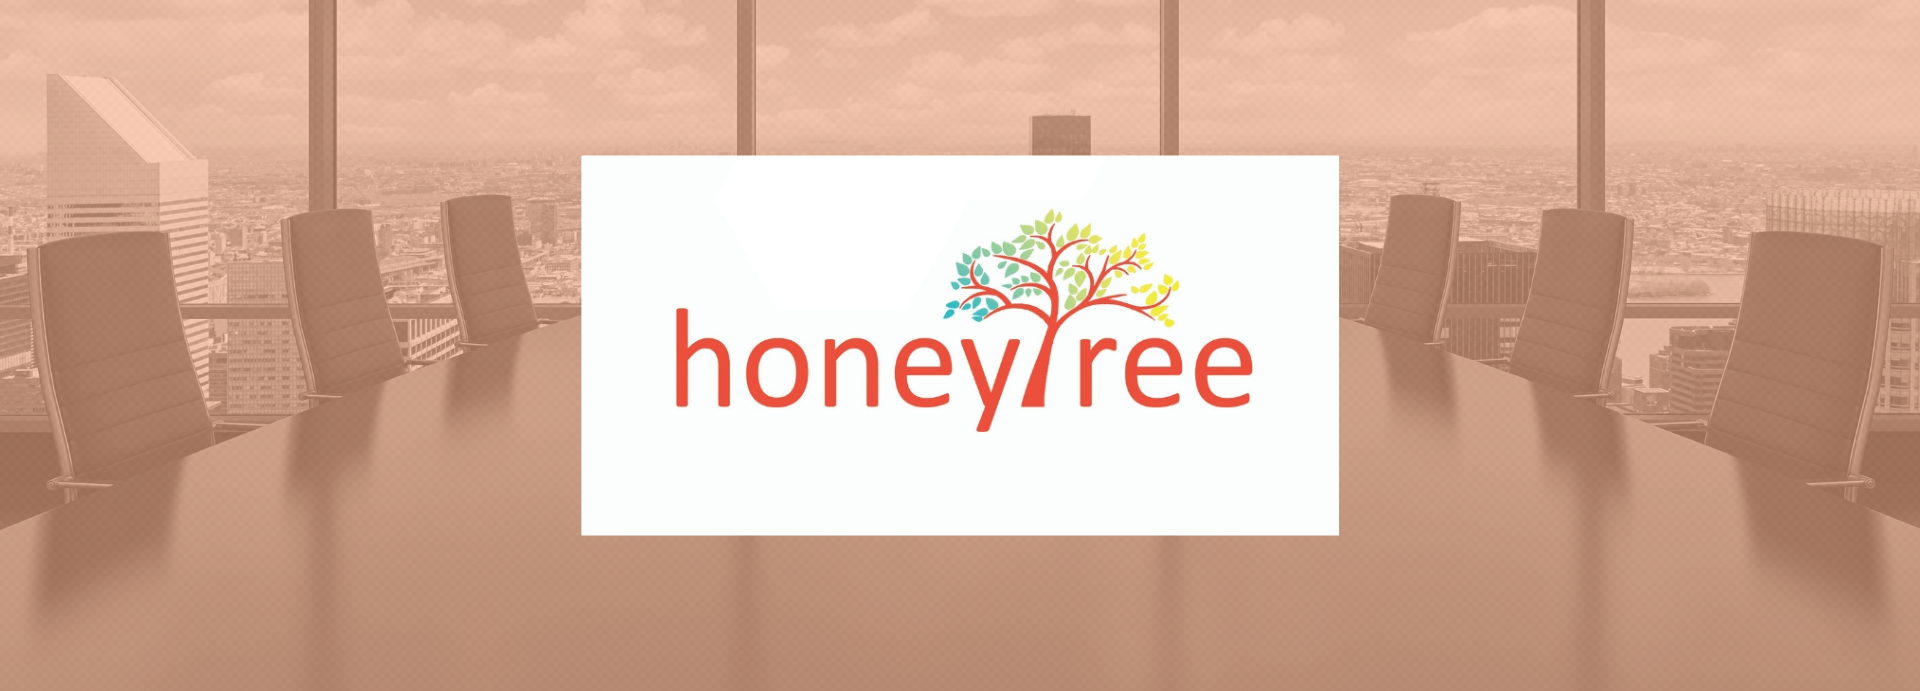 Honeytree Focused On Sustainability For The Long Term